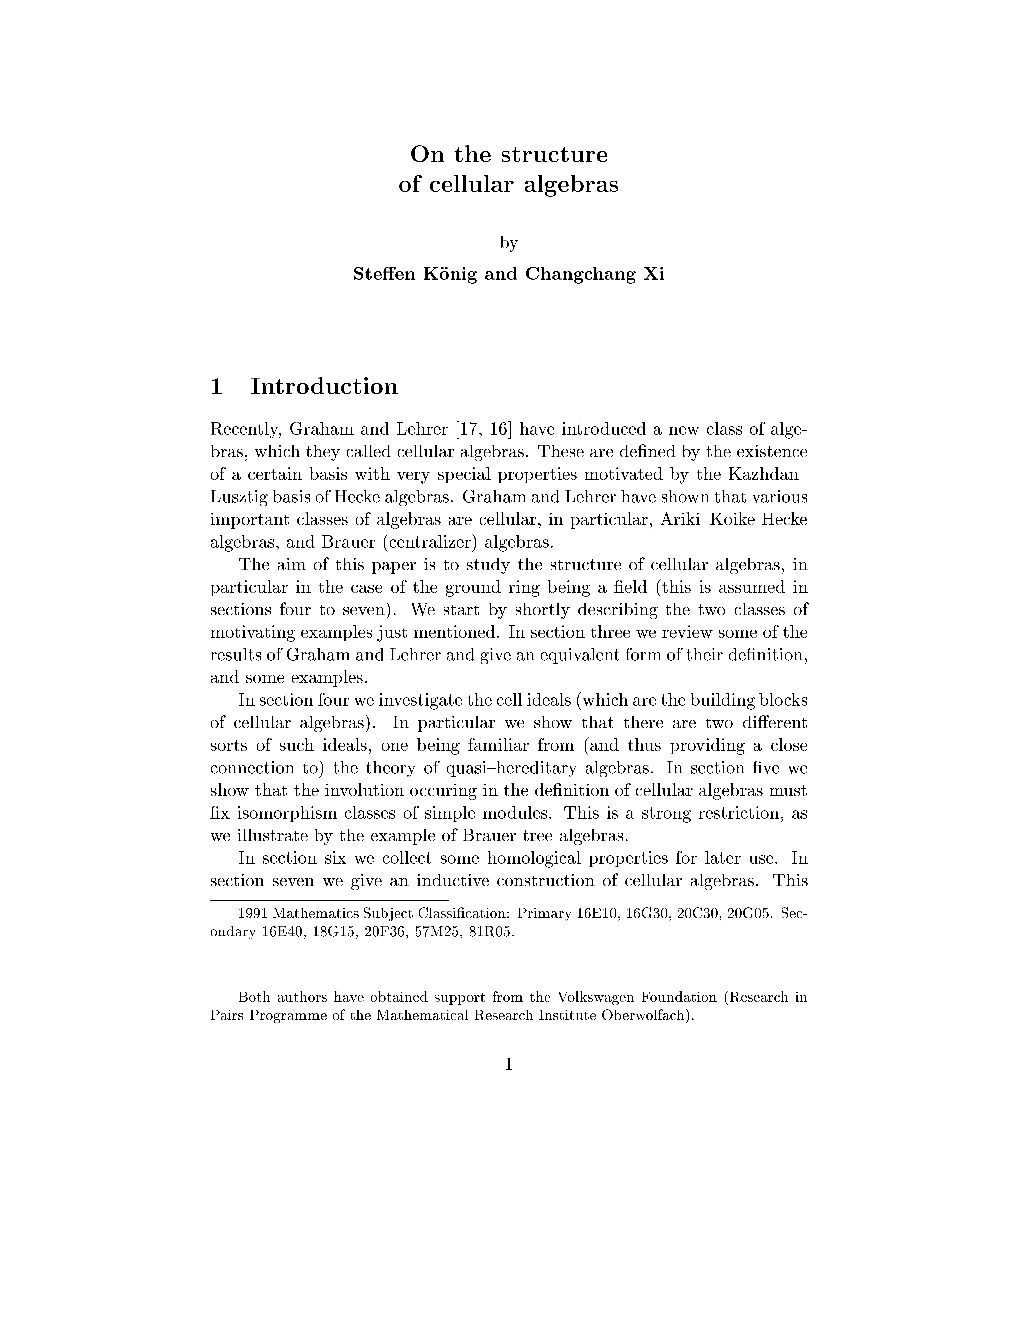 On the Structure of Cellular Algebras 1 Introduction